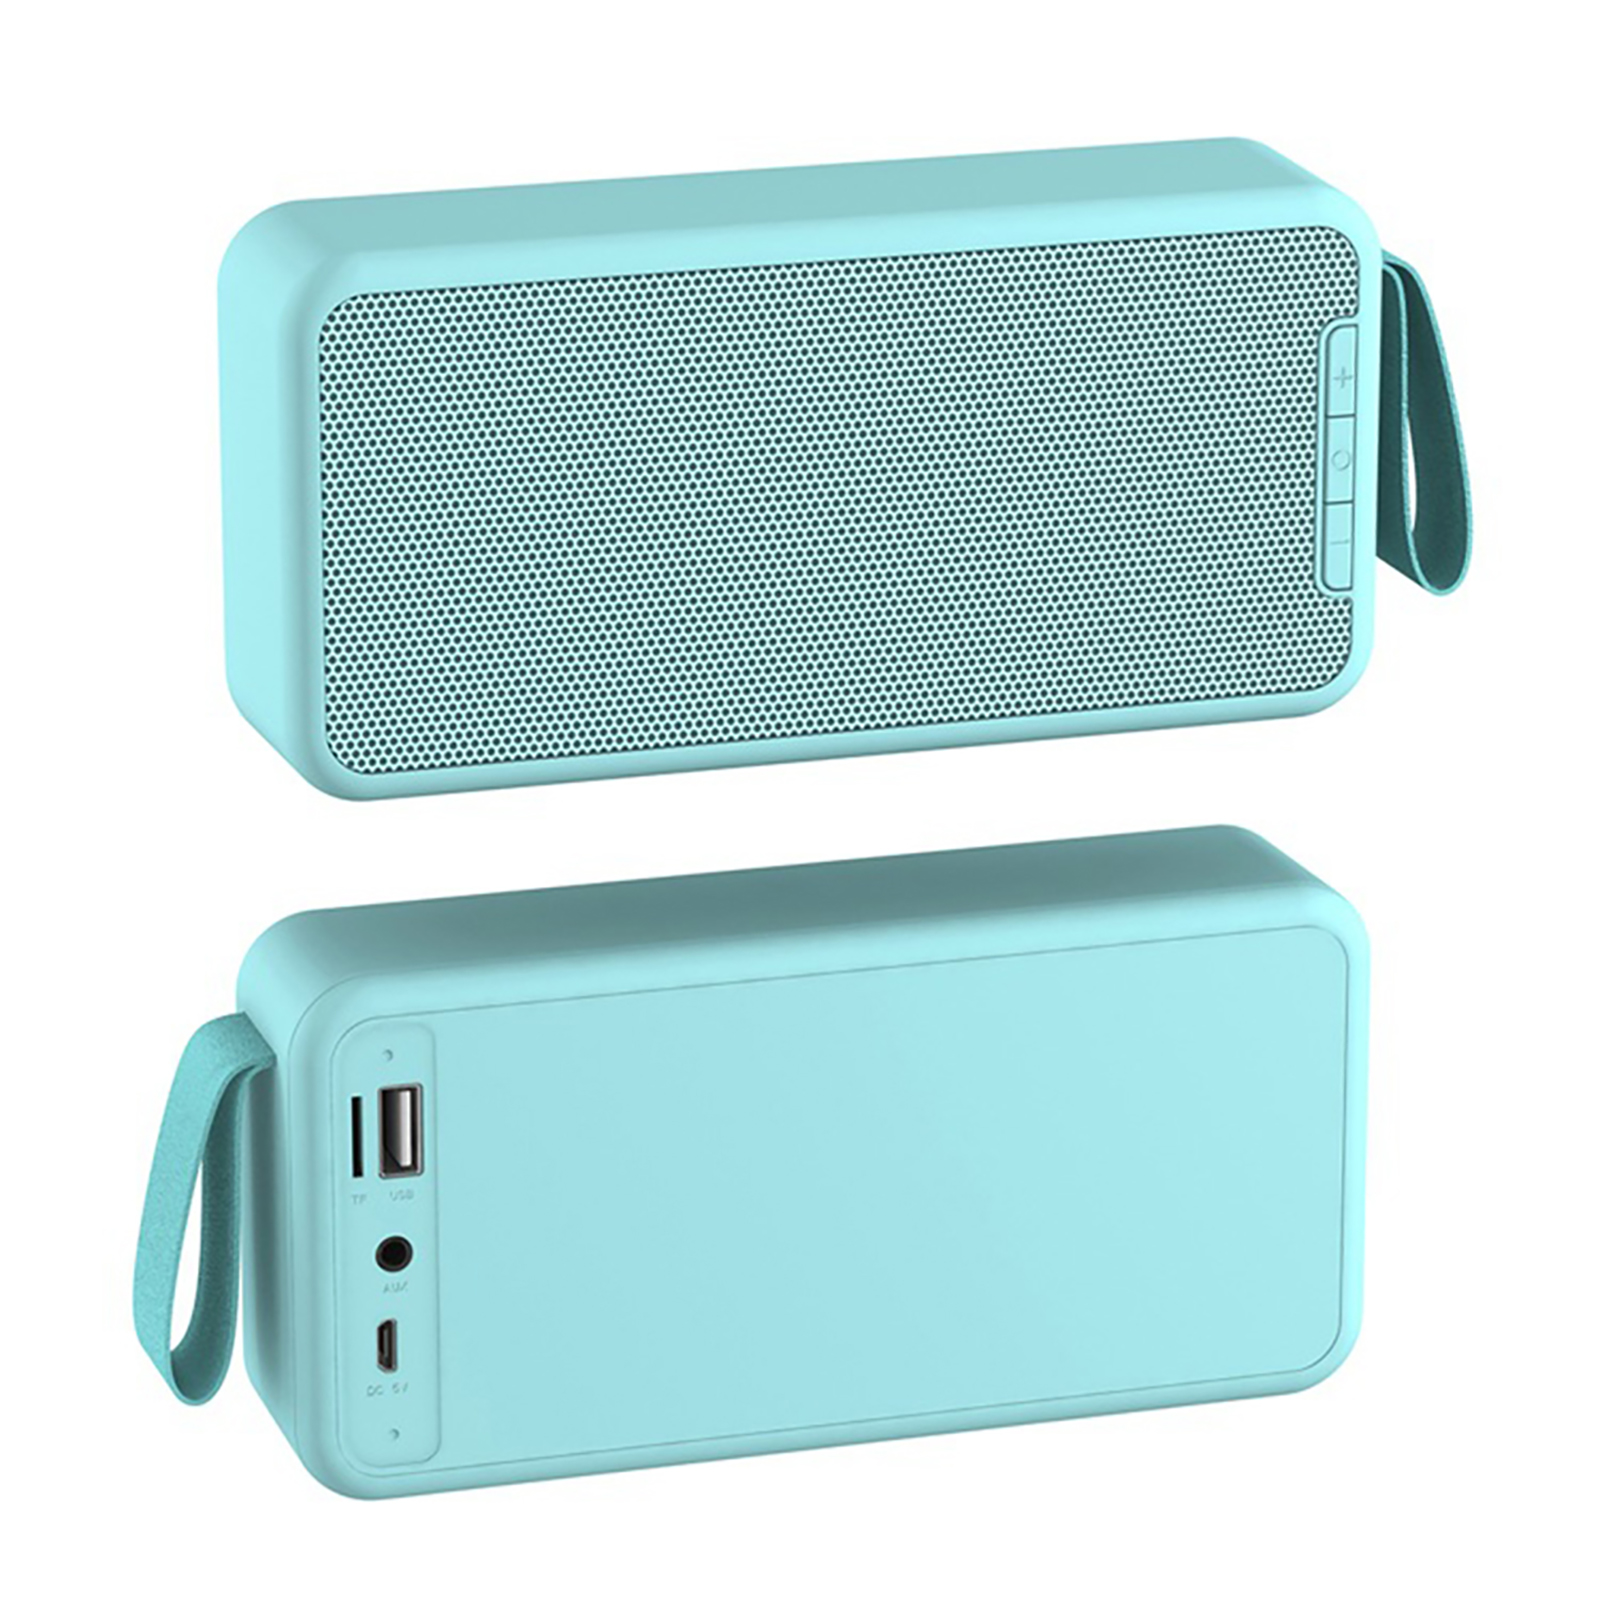 XS MAX Portable Wireless Speaker Crystal Clear Stereo Sound Rich Bass Speakers TF Card U Disk Audio Cable Player light blue